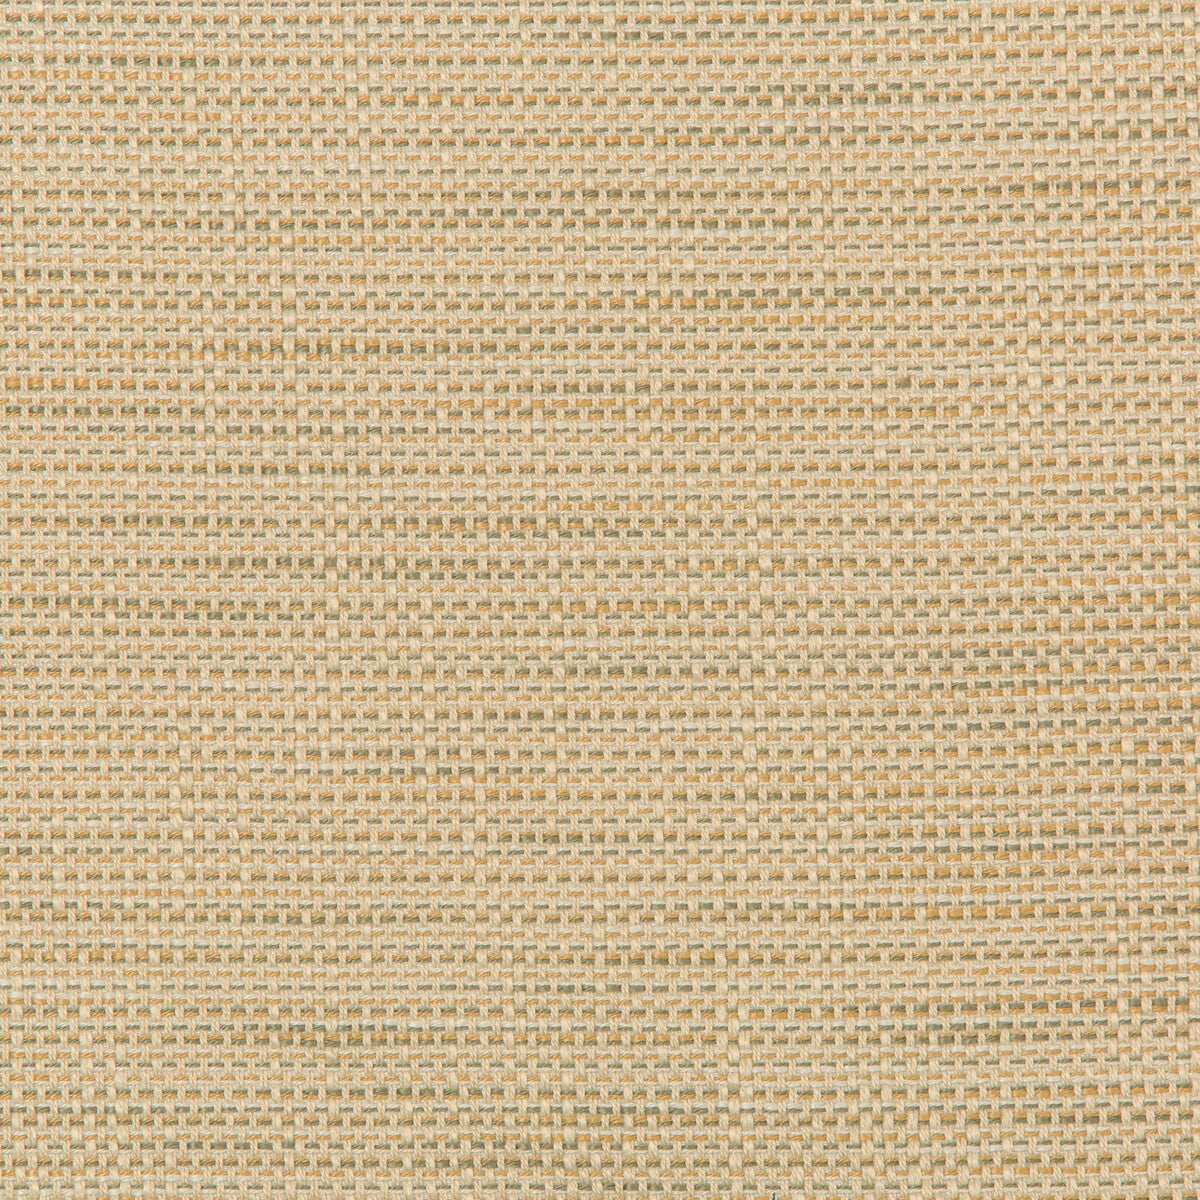 Kravet Design fabric in 36082-106 color - pattern 36082.106.0 - by Kravet Design in the Inside Out Performance Fabrics collection